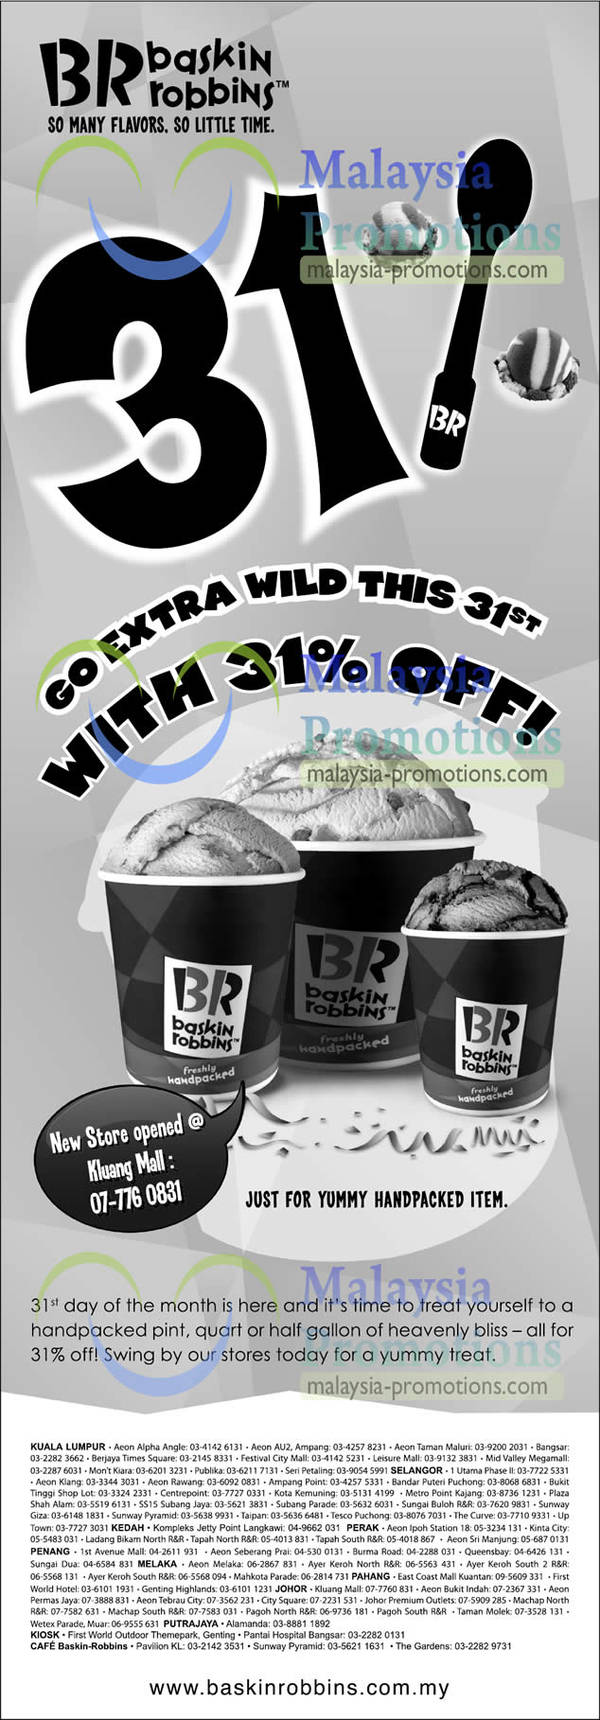 Featured image for Baskin-Robbins 31% Off Ice Cream Promotion @ Nationwide 31 Mar 2013